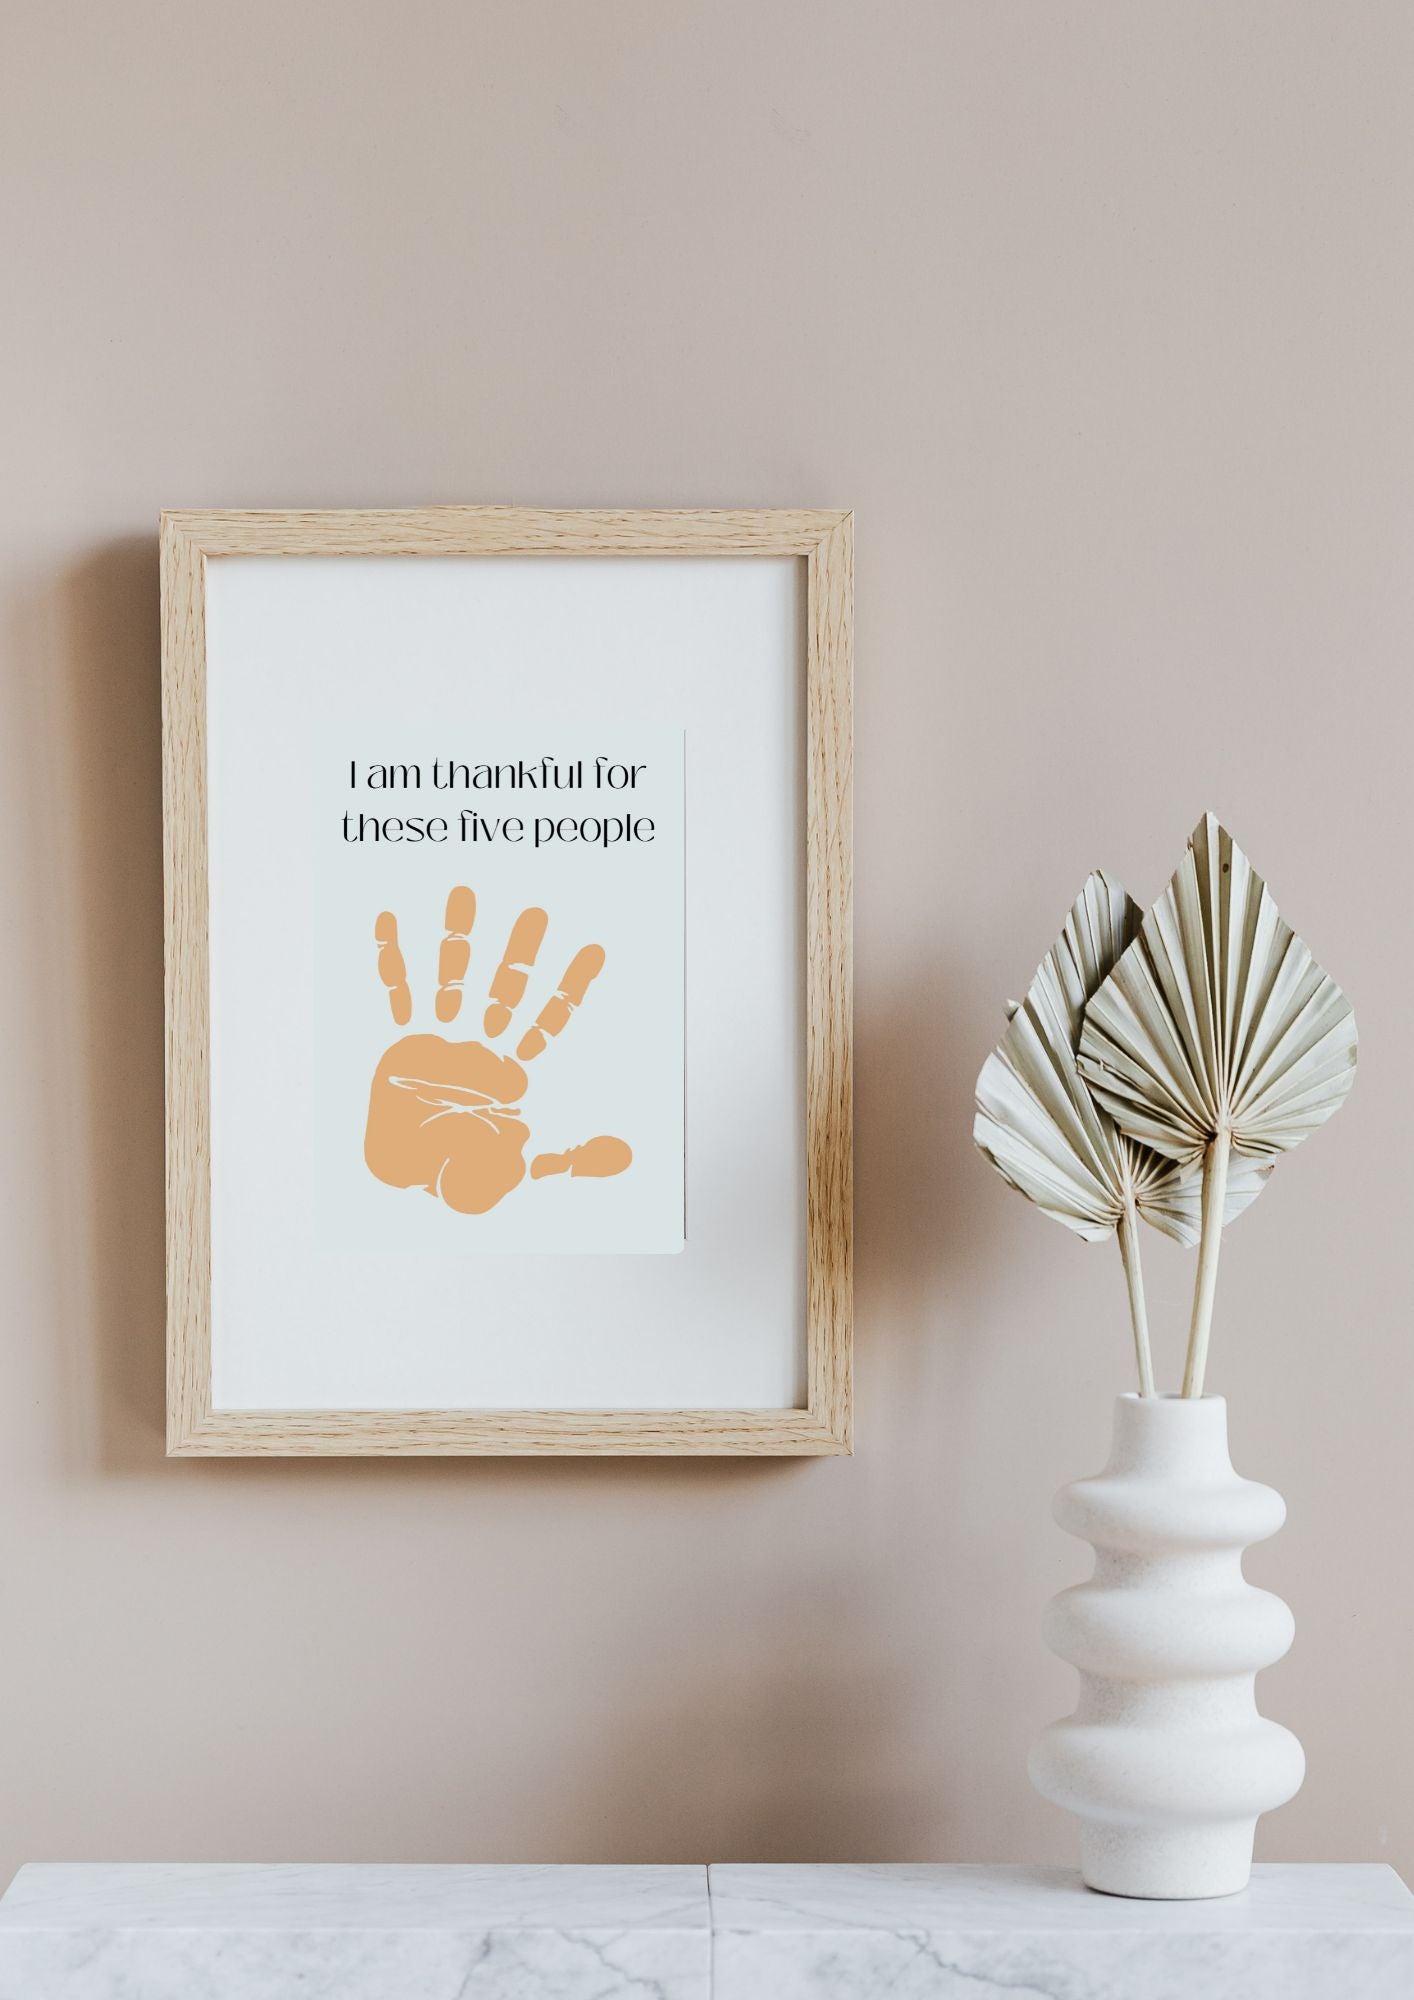 I am thankful for these five people Poster (Digital Download)